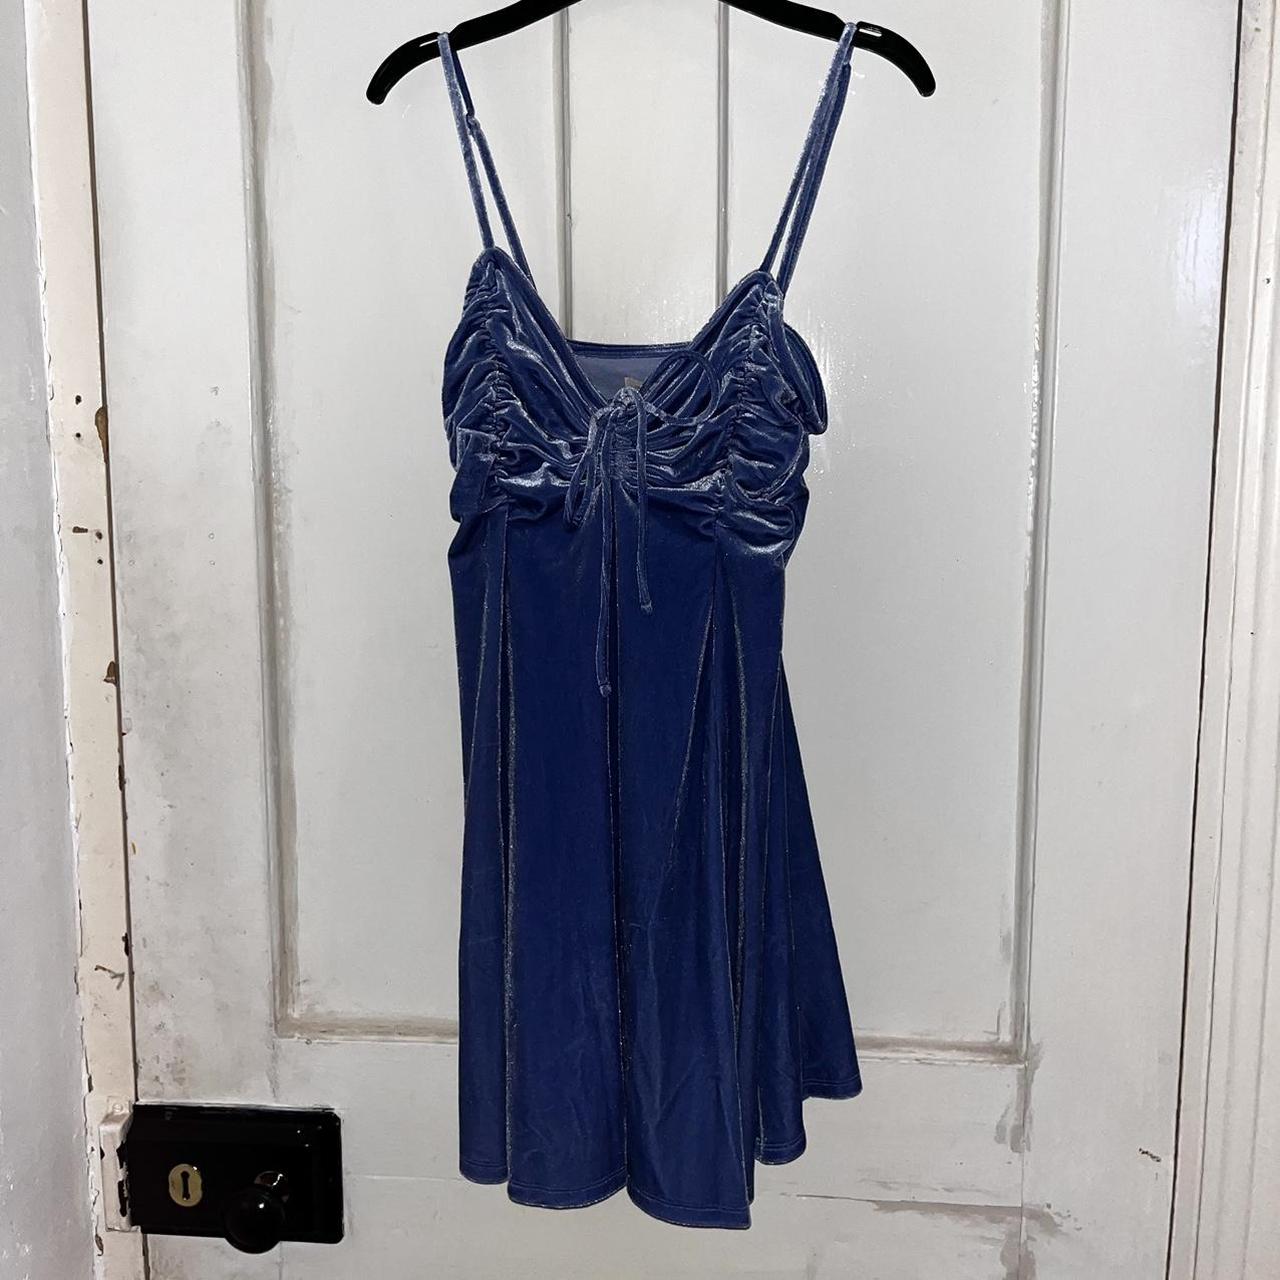 Blue velvet urban outfitters dress Style is fit and... - Depop